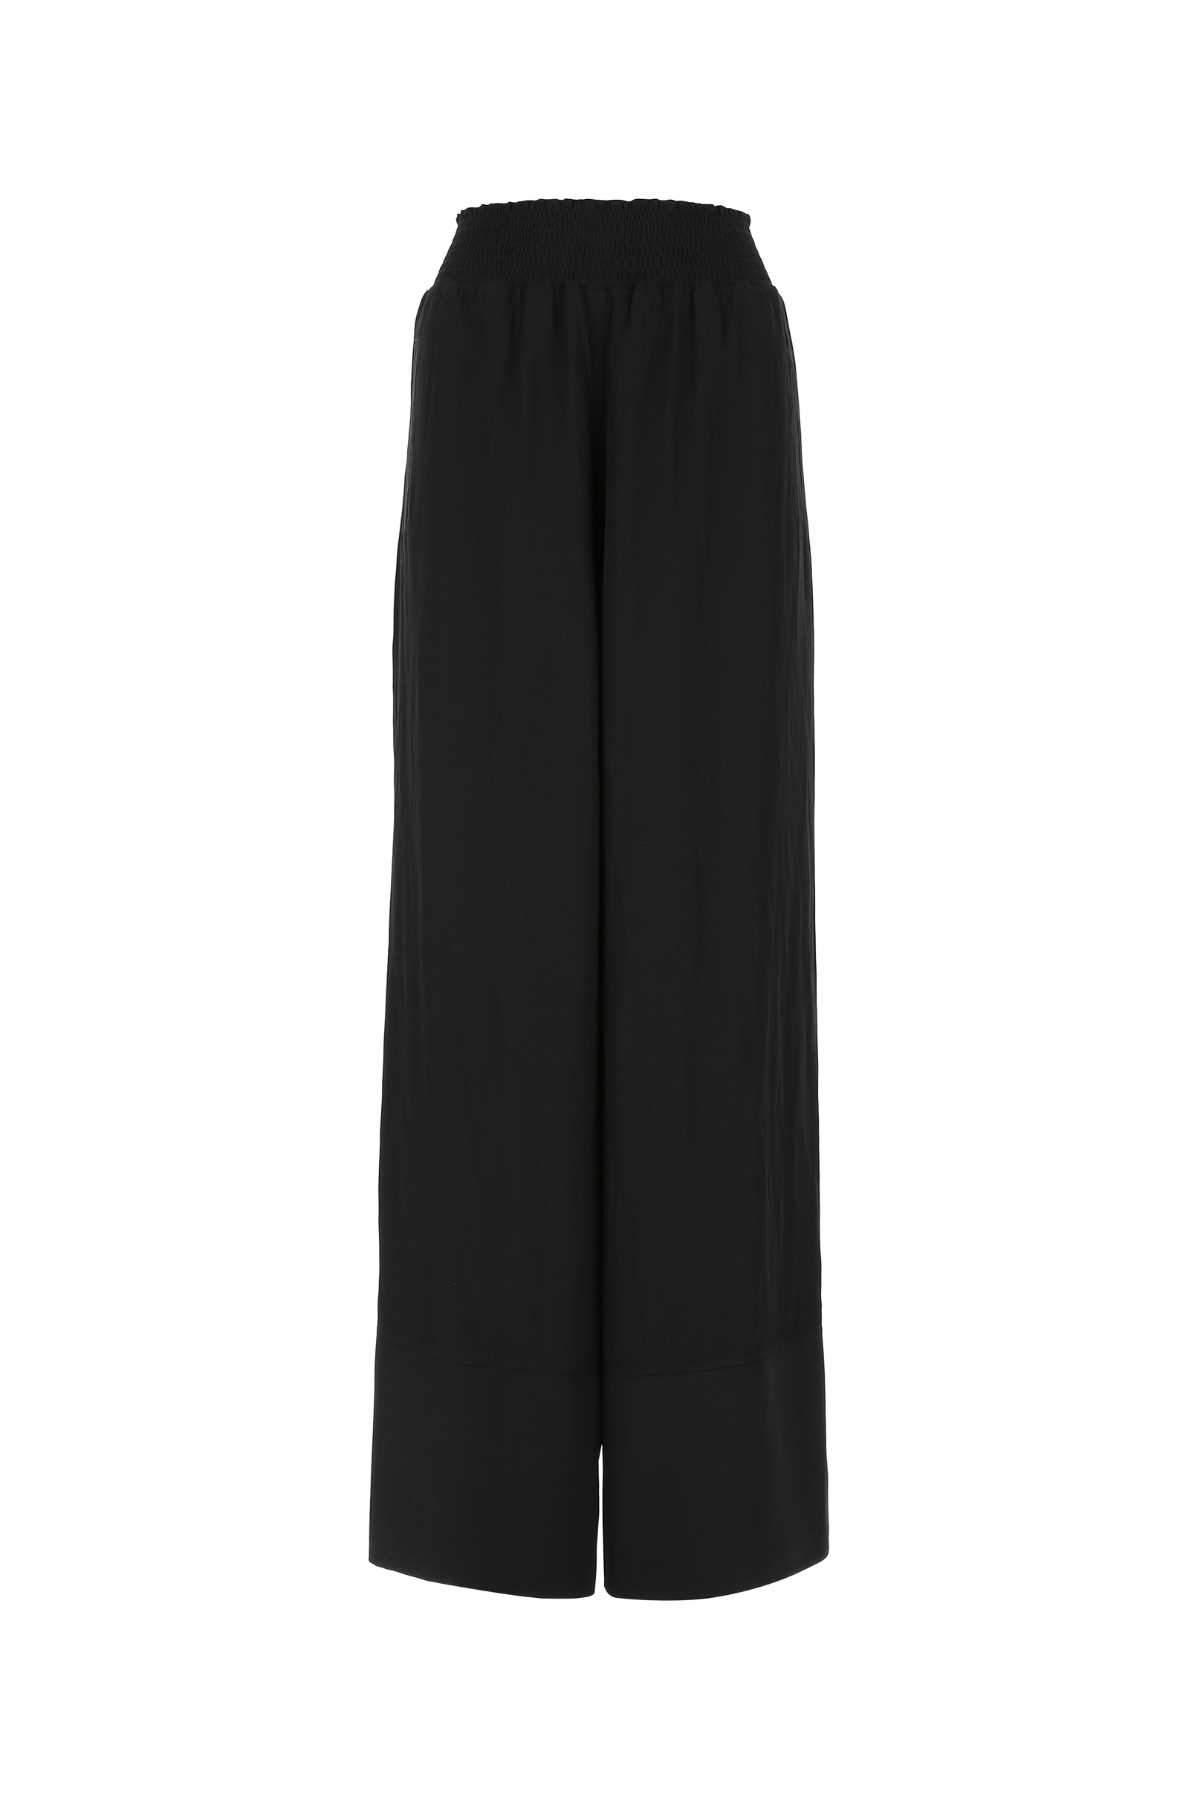 JW Anderson Synthetic Polyester Palazzo Pant Jw A, Plain Pattern in Black -  Save 21% - Lyst